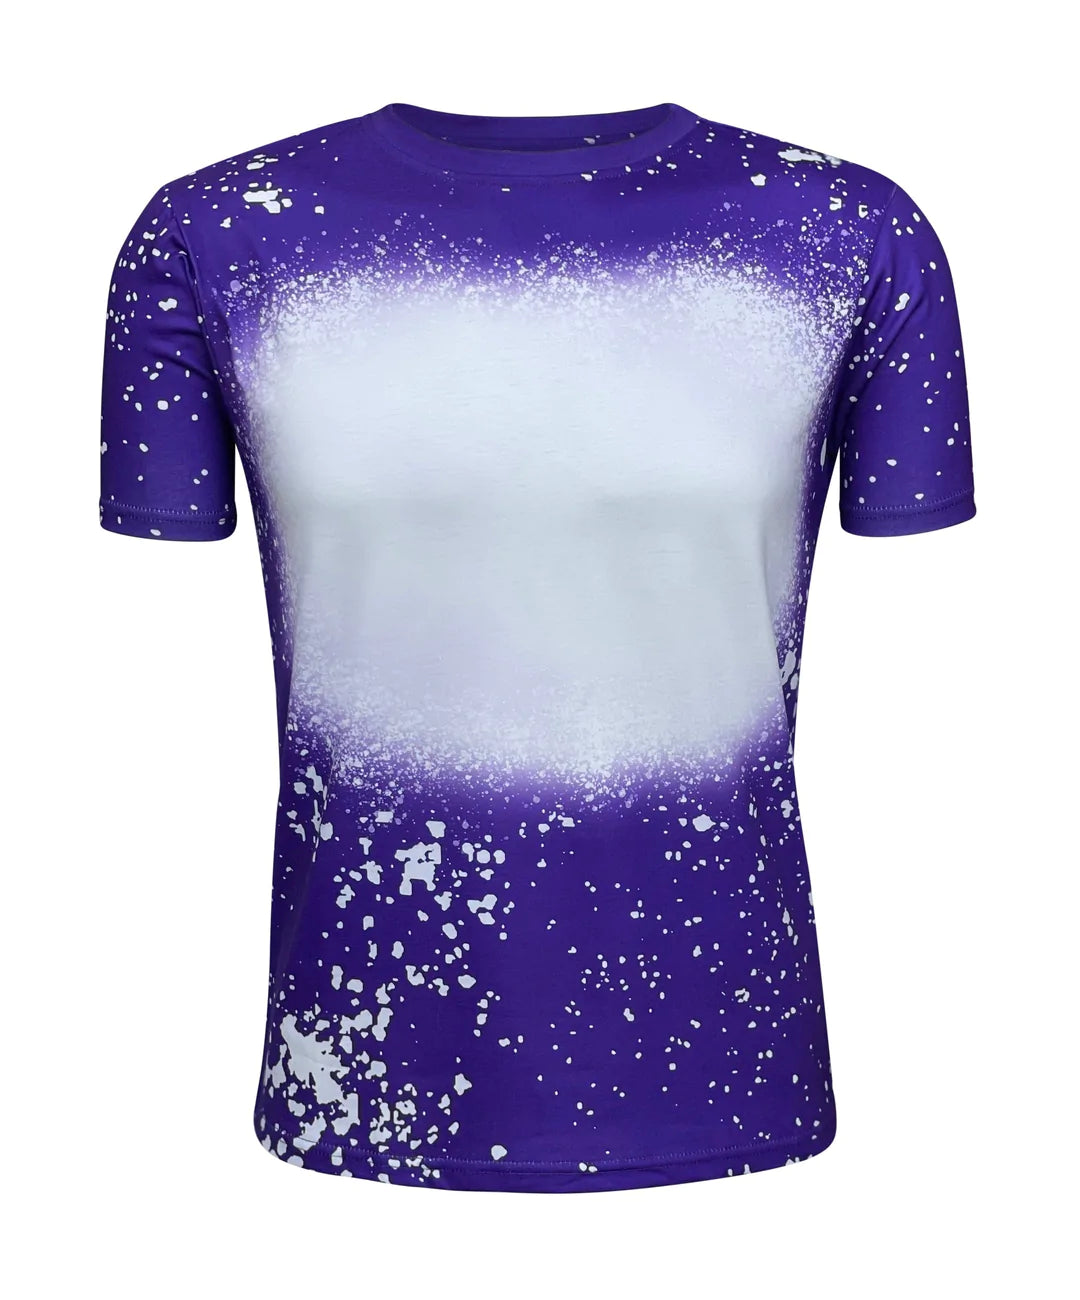 Unisex Faux Bleached Shirts Ready For Sublimation Or Screen Transfer 5762